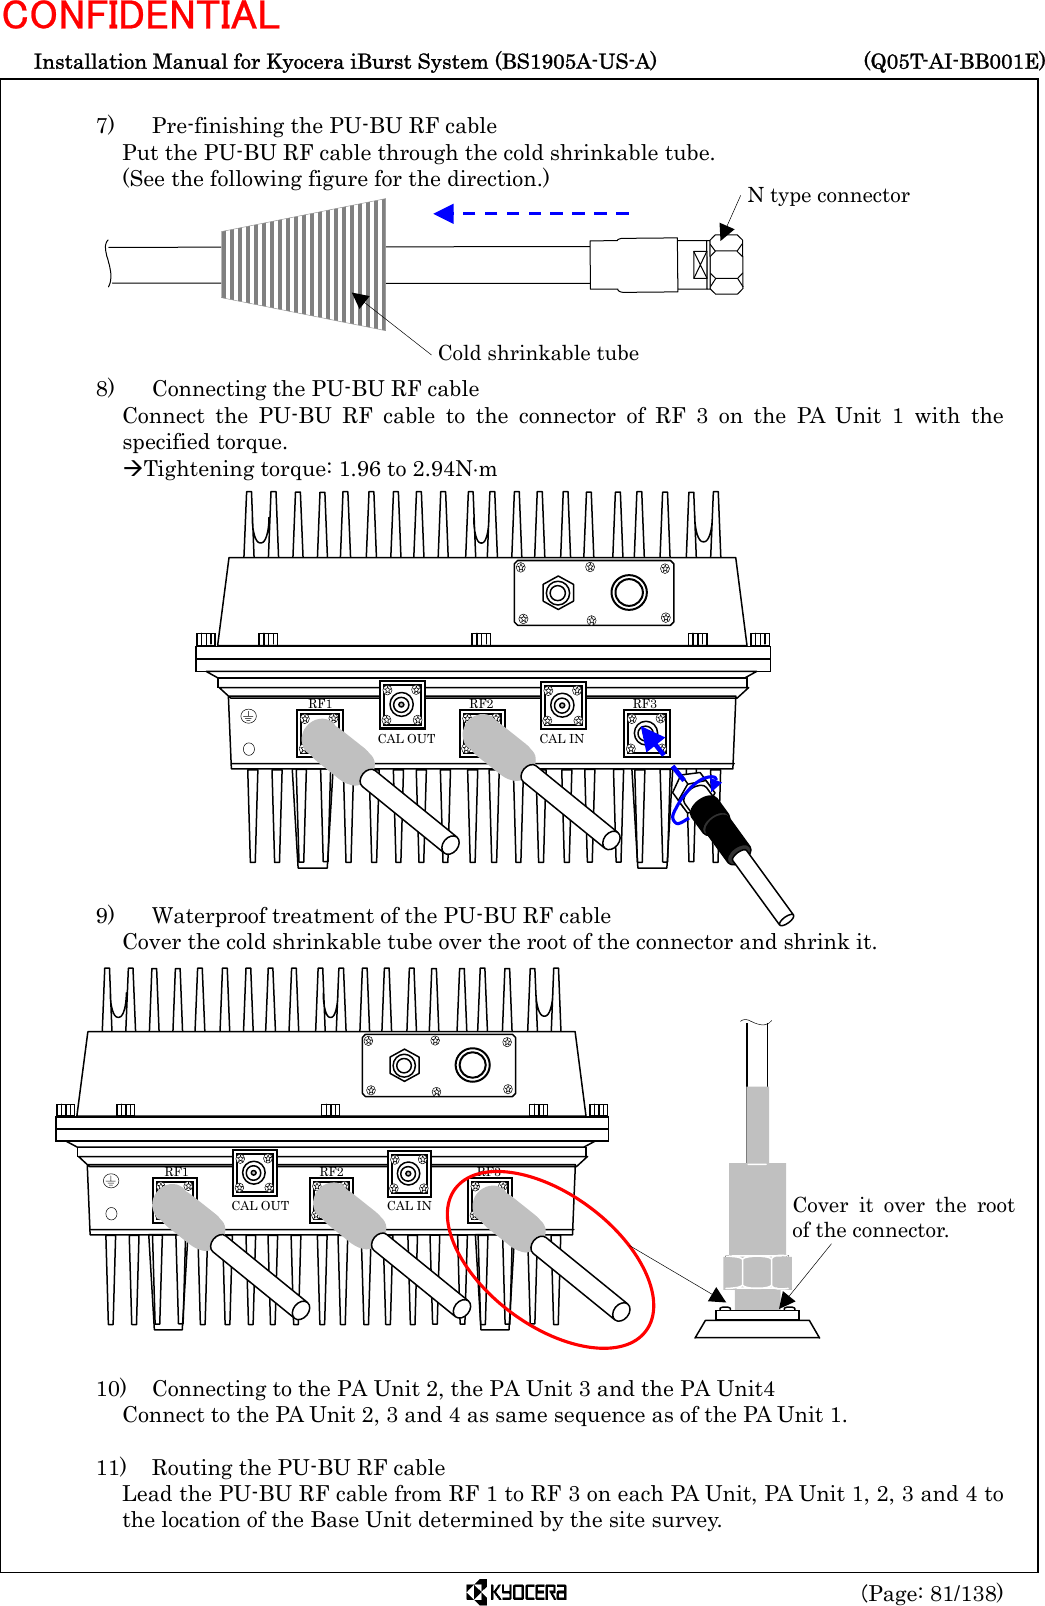  Installation Manual for Kyocera iBurst System (BS1905A-US-A)     (Q05T-AI-BB001E) (Page: 81/138) CONFIDENTIAL  7)    Pre-finishing the PU-BU RF cable Put the PU-BU RF cable through the cold shrinkable tube.   (See the following figure for the direction.)        8)    Connecting the PU-BU RF cable Connect the PU-BU RF cable to the connector of RF 3 on the PA Unit 1 with the specified torque. ÆTightening torque: 1.96 to 2.94N⋅m                 9)    Waterproof treatment of the PU-BU RF cable Cover the cold shrinkable tube over the root of the connector and shrink it.                 10)    Connecting to the PA Unit 2, the PA Unit 3 and the PA Unit4 Connect to the PA Unit 2, 3 and 4 as same sequence as of the PA Unit 1.  11)    Routing the PU-BU RF cable Lead the PU-BU RF cable from RF 1 to RF 3 on each PA Unit, PA Unit 1, 2, 3 and 4 to the location of the Base Unit determined by the site survey. Cold shrinkable tube N type connector Cover it over the rootof the connector.   RF3 RF2 RF1 CAL OUT  CAL IN   RF3 RF2 RF1 CAL OUT  CAL IN 